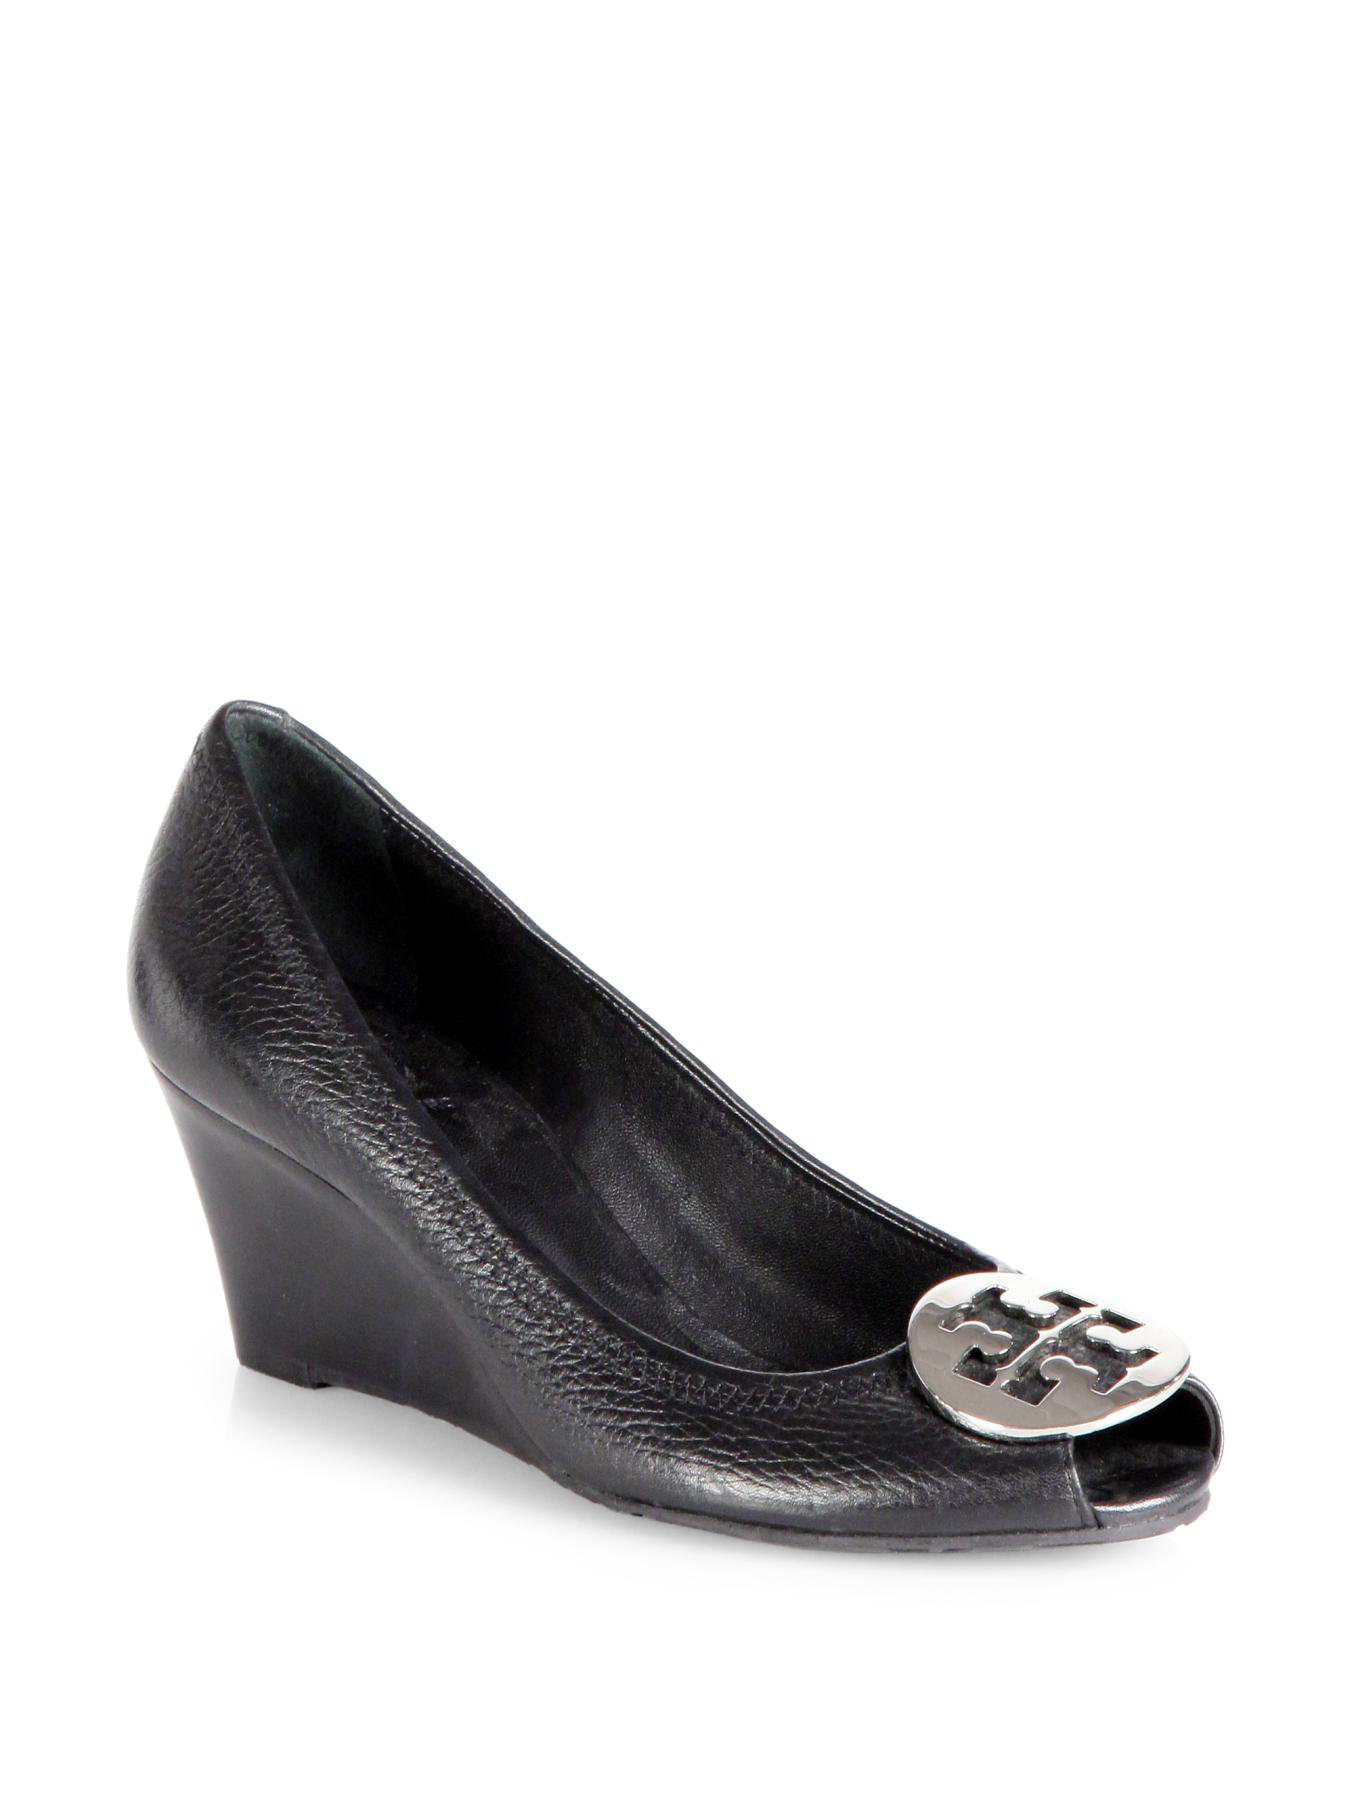 Tory burch Sally 2 Tumbled Leather Wedge Pumps in Black | Lyst